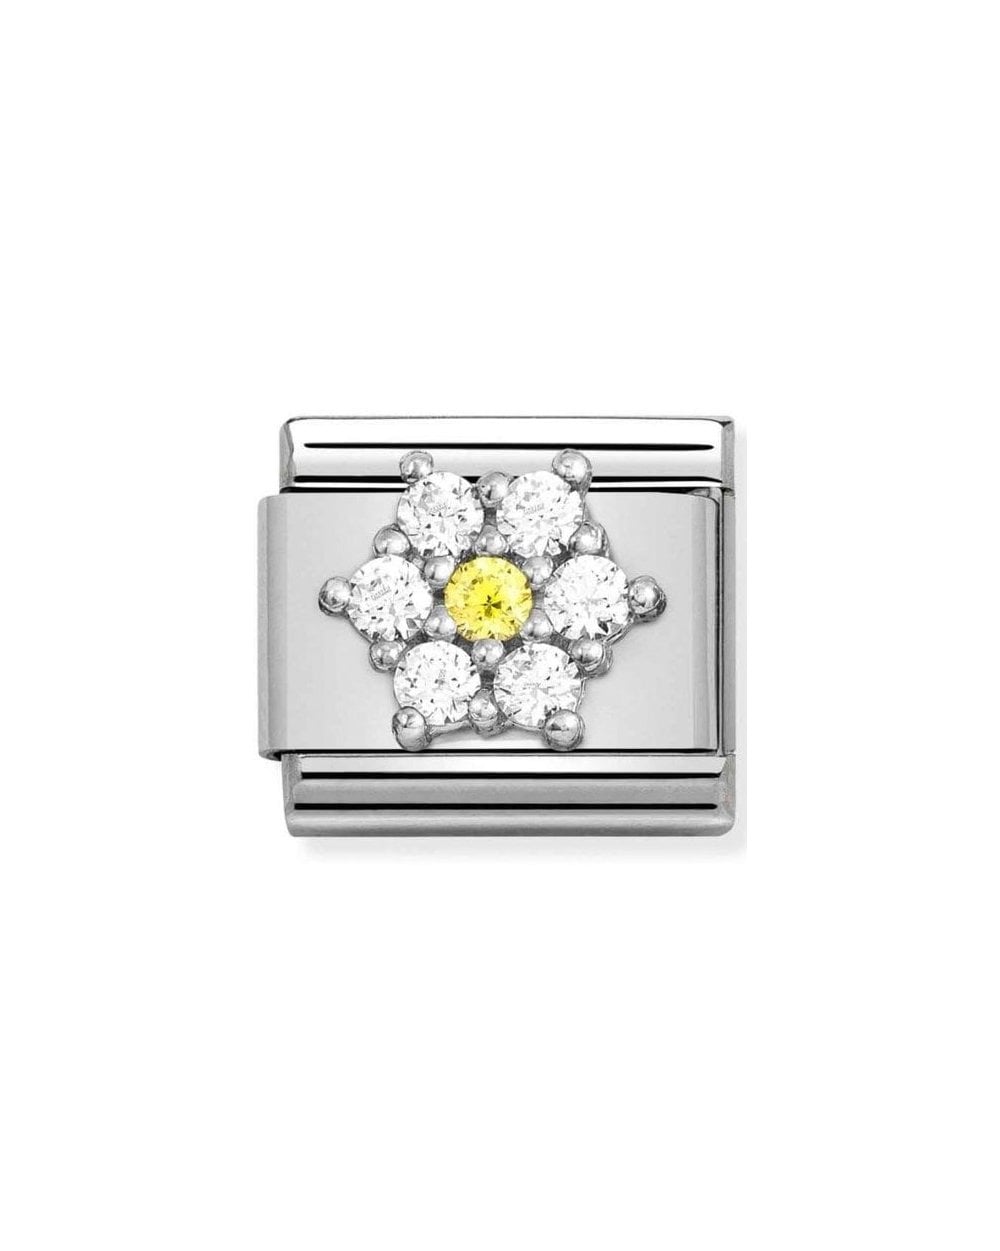 Composable Cl Symbols Steel Cz And Silver 925 Rich White And Yellow Flower